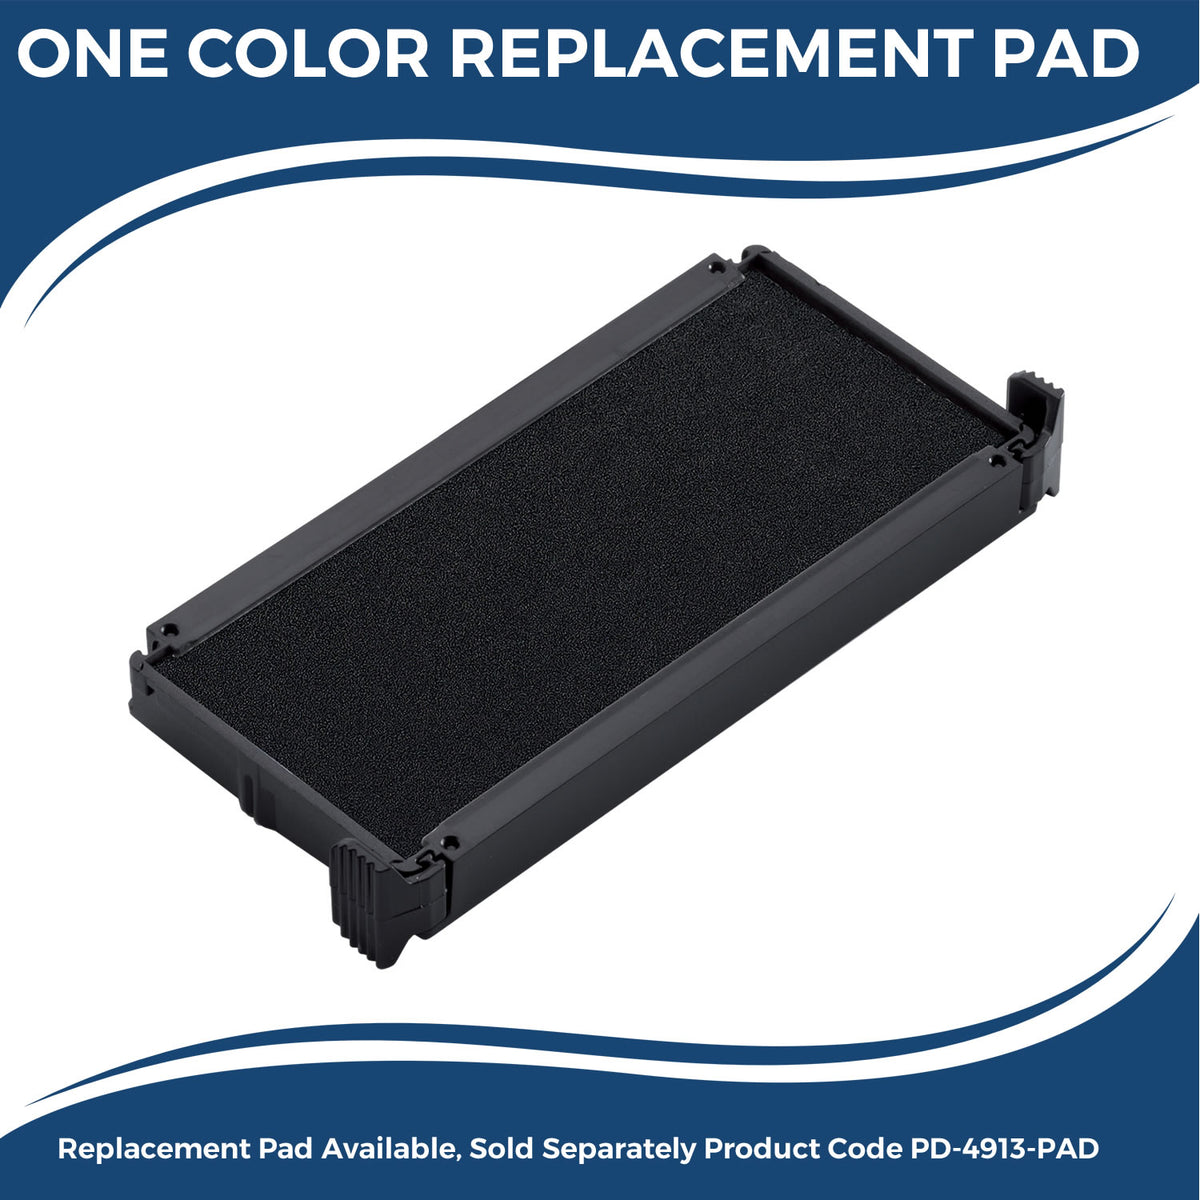 Large Self-Inking Certificada Stamp 5554S Large Replacment Pad